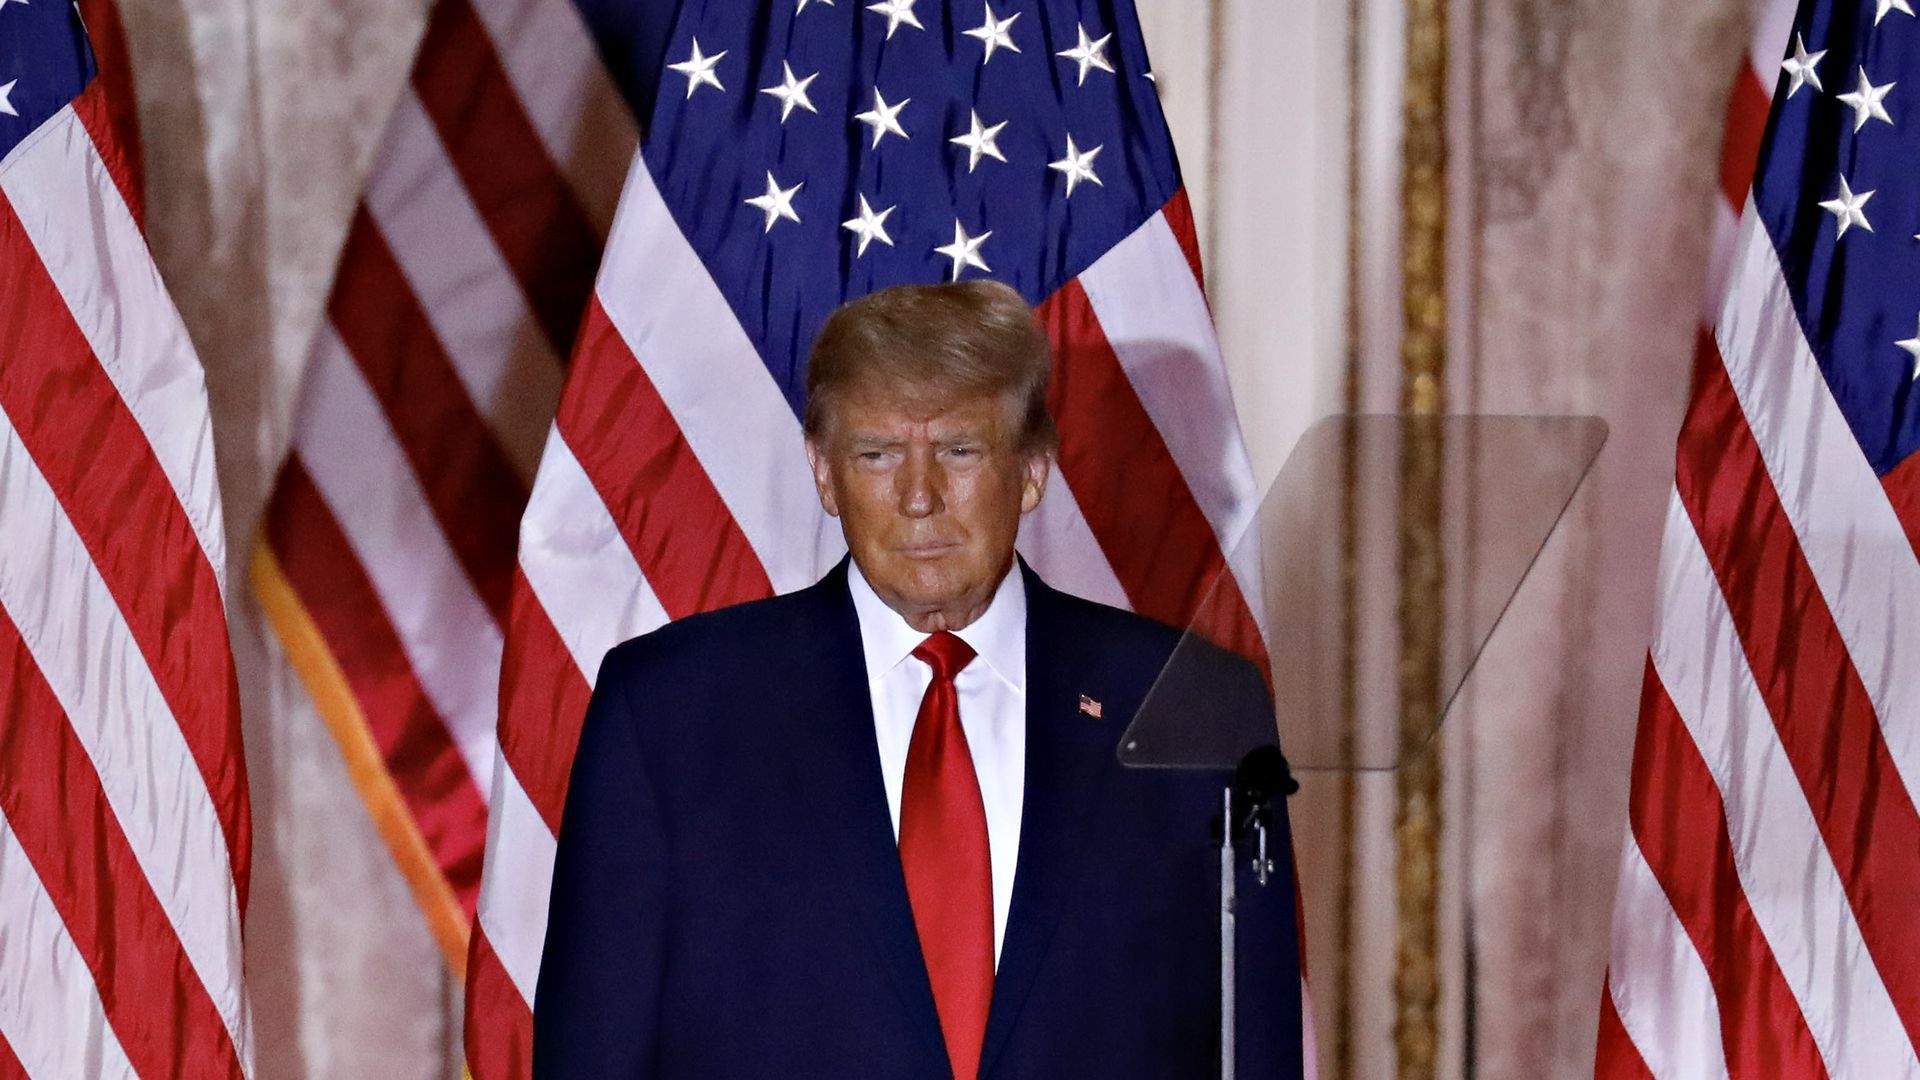 Donald Trump stands in front of U.S. flags as he speaks at a 2024 campaign event in Florida. 